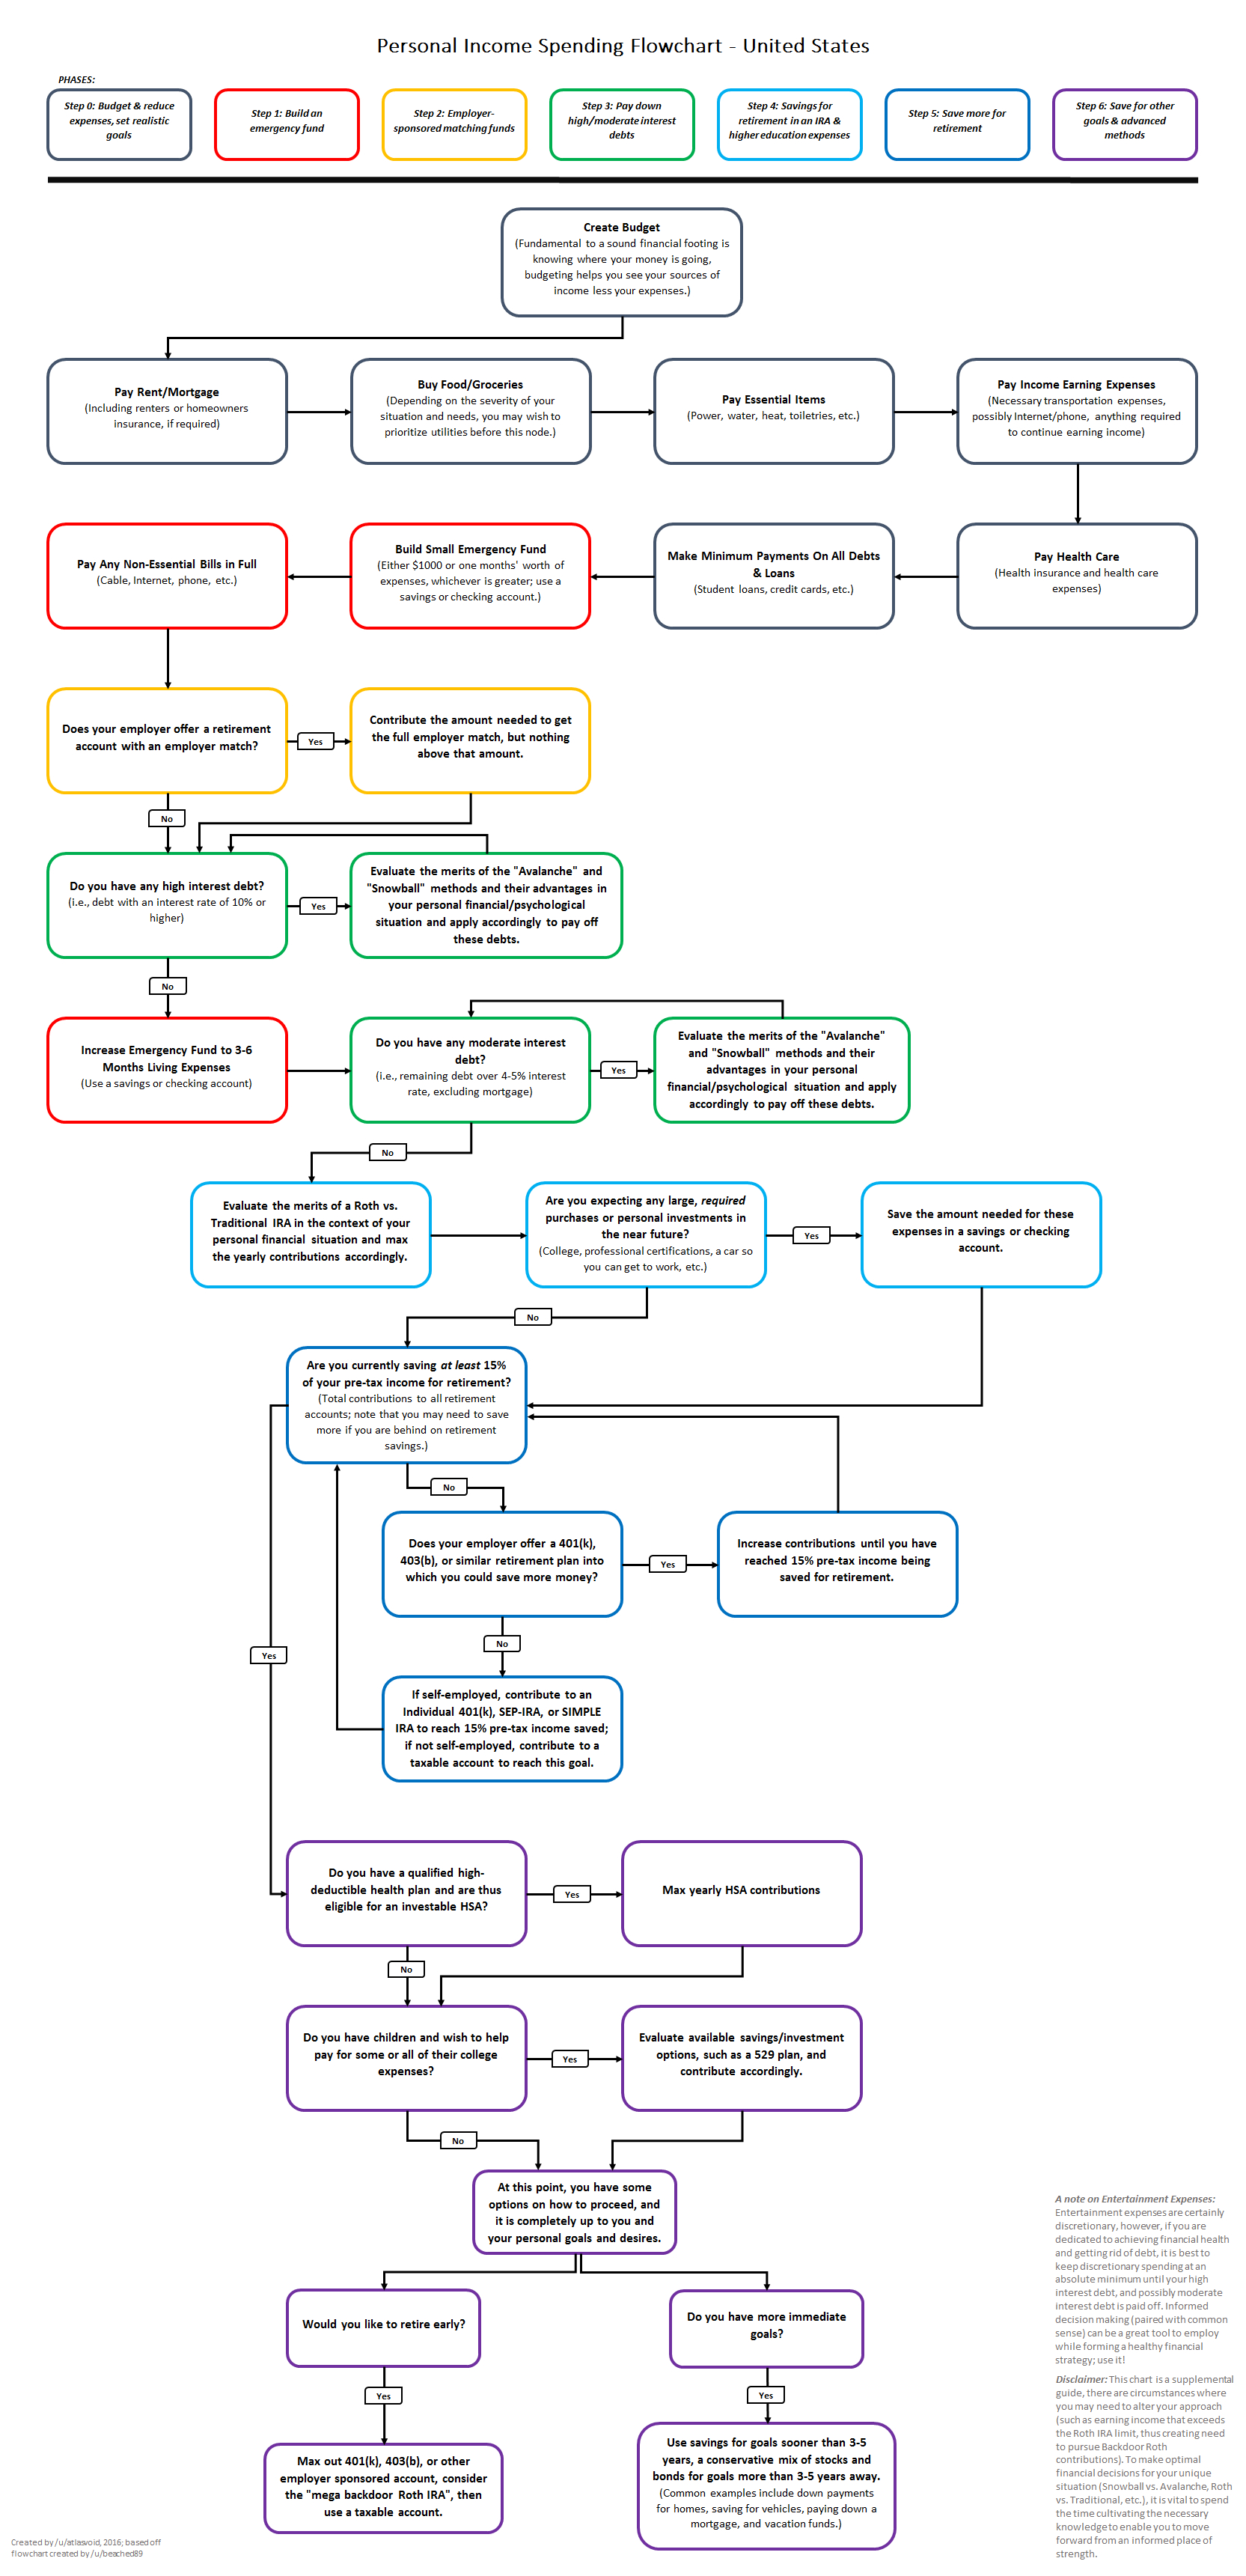 Martin Lewis Budget Spreadsheet Throughout How To Prioritize Spending Your Money  A Flowchart Redesigned